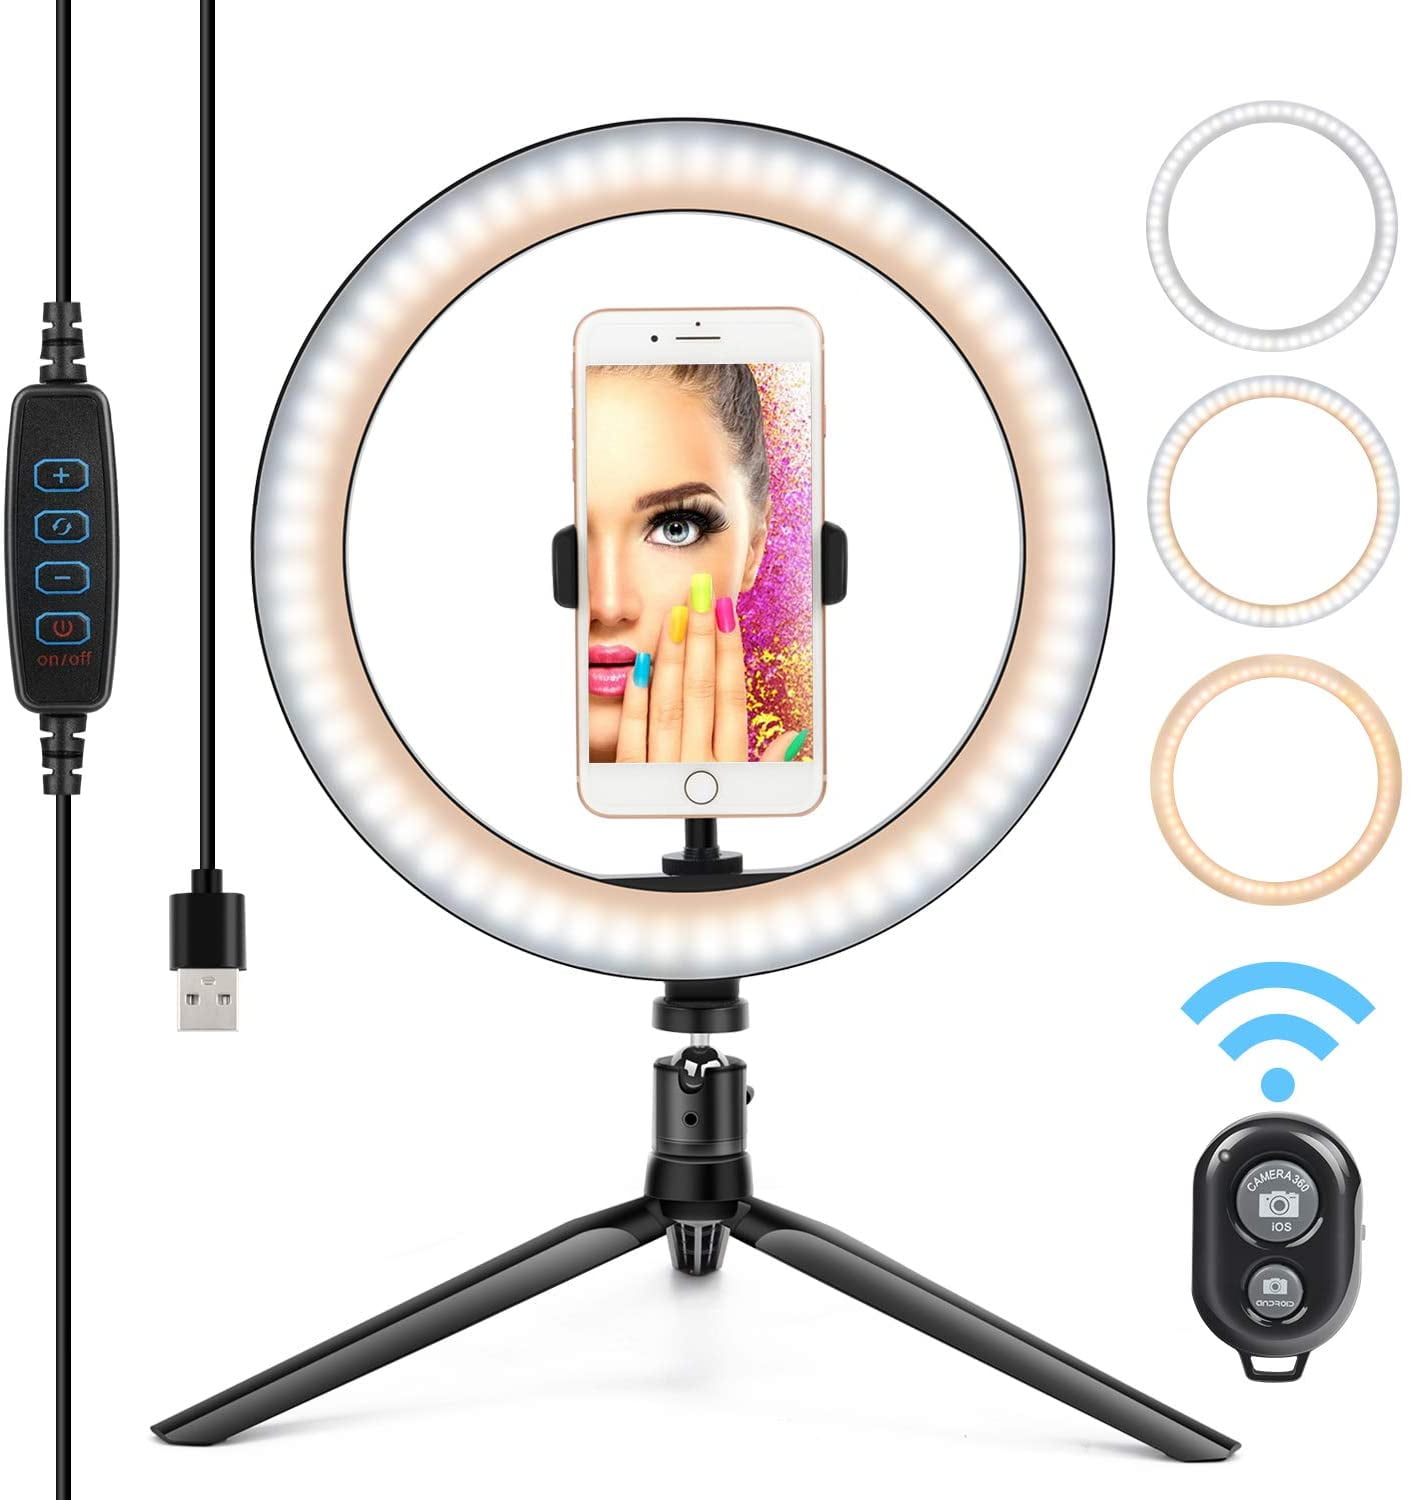 Ring Light 18 Inch with Tripod Stand & Phone Holder LED Selfie Circle Light 3200-5500K Dimmable Remote Control Ringlight for Makeup/Camera/YouTube Video/Live Stream/Zoom Calls Including Carrying Bag 